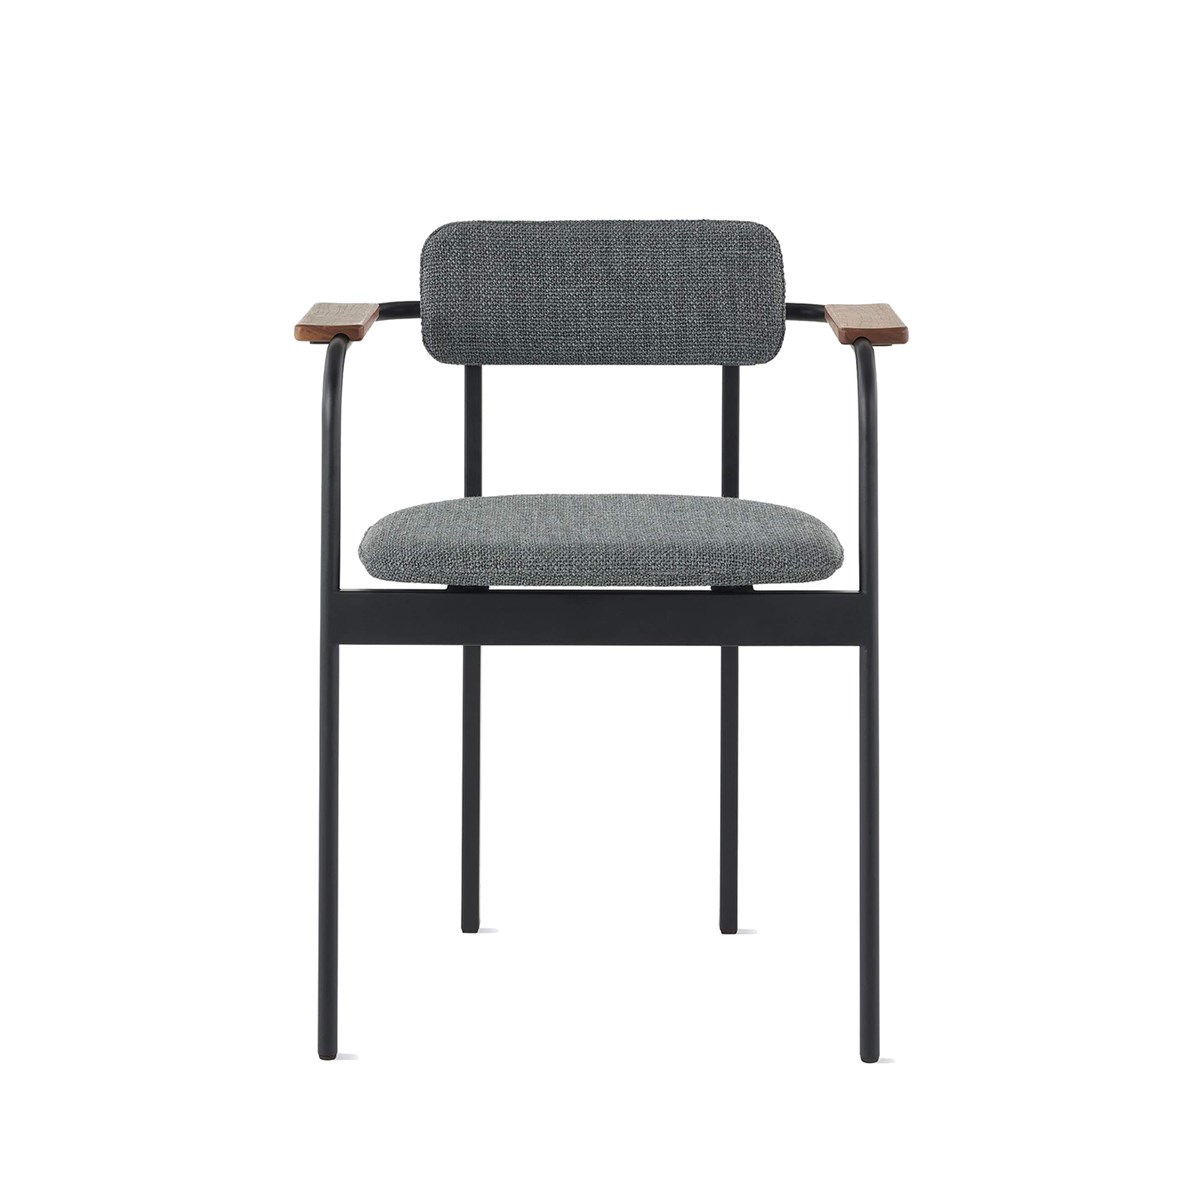 Ig Prd Ovw Betwixt Chairs 04